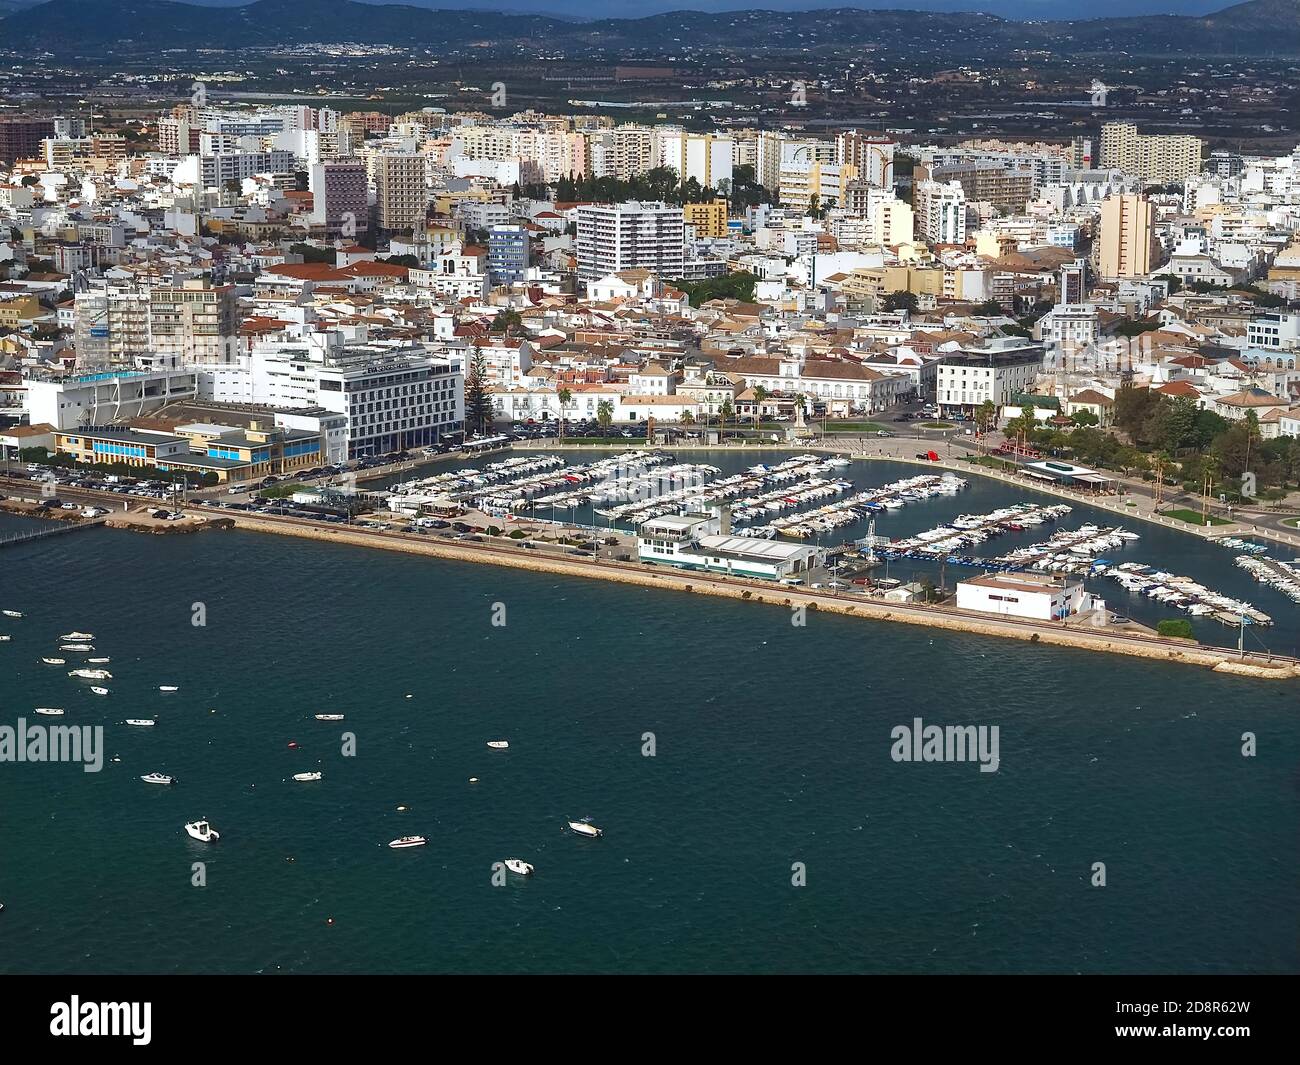 Aerial view of the Cityscape of Faro at the Algarve coast in Portugal seen from an airplane Stock Photo